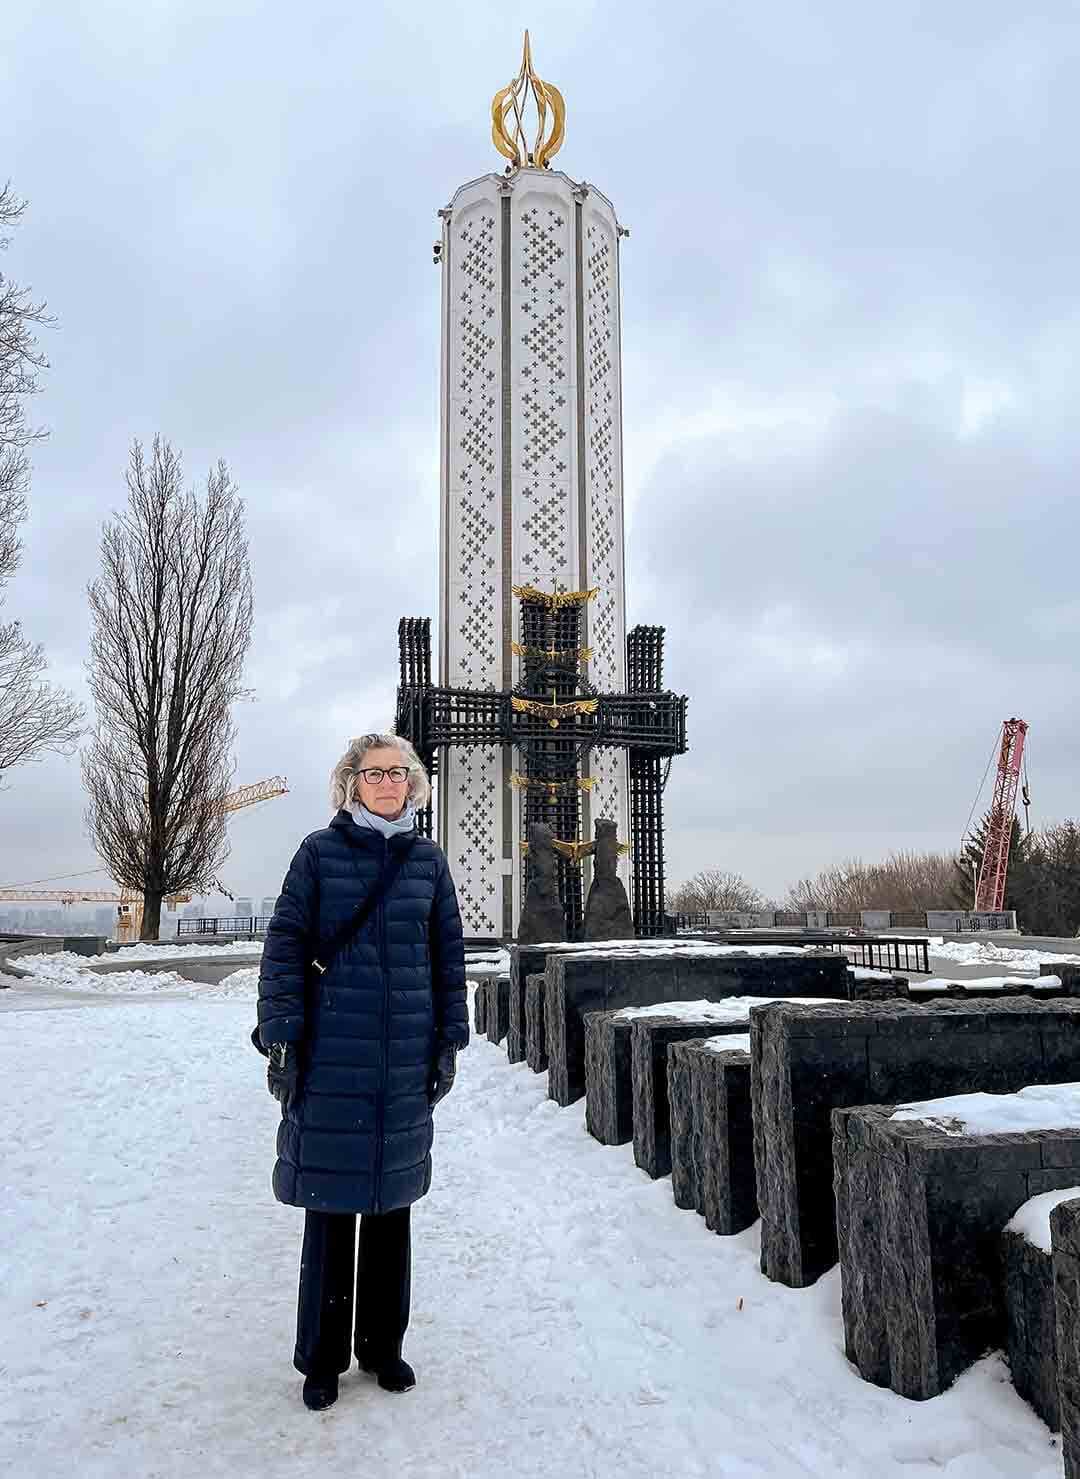 Larysa Kurylas ’80 stands by “Candle of Memory” at the National Holodomor Memorial Complex in Kyiv, Ukraine